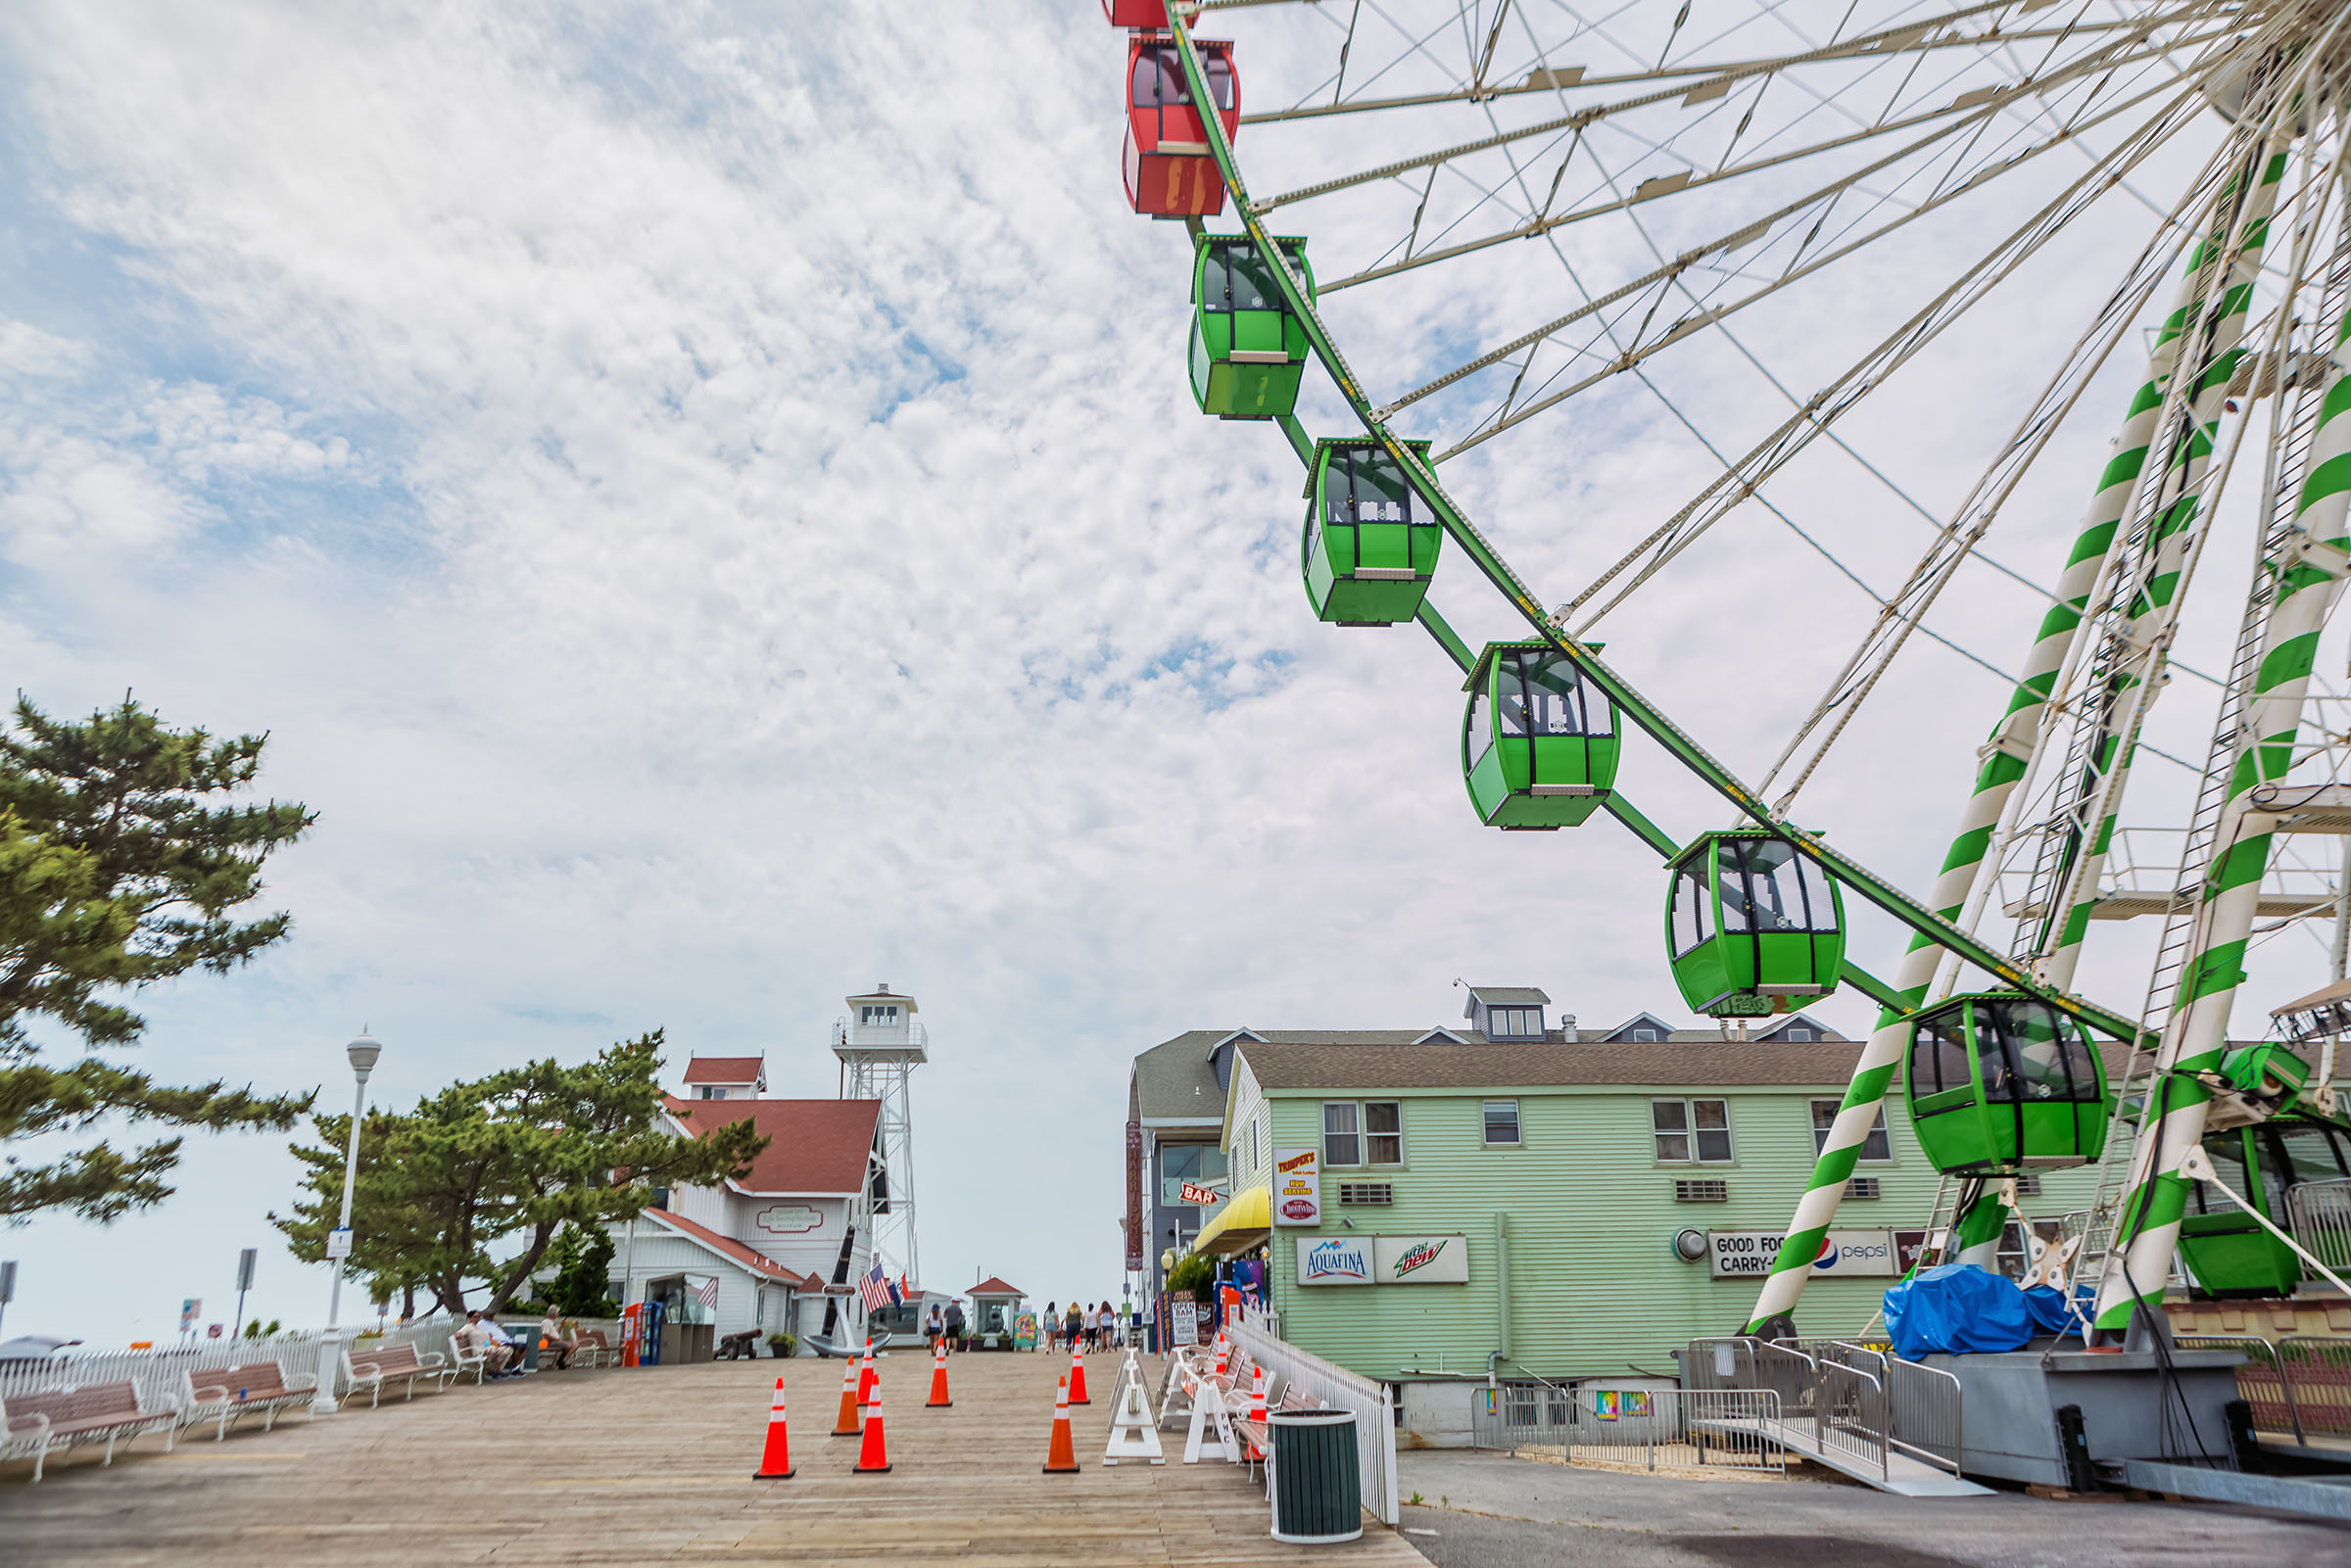 UPDATED: Big Wheel To Come Down Over Encroachment Issue